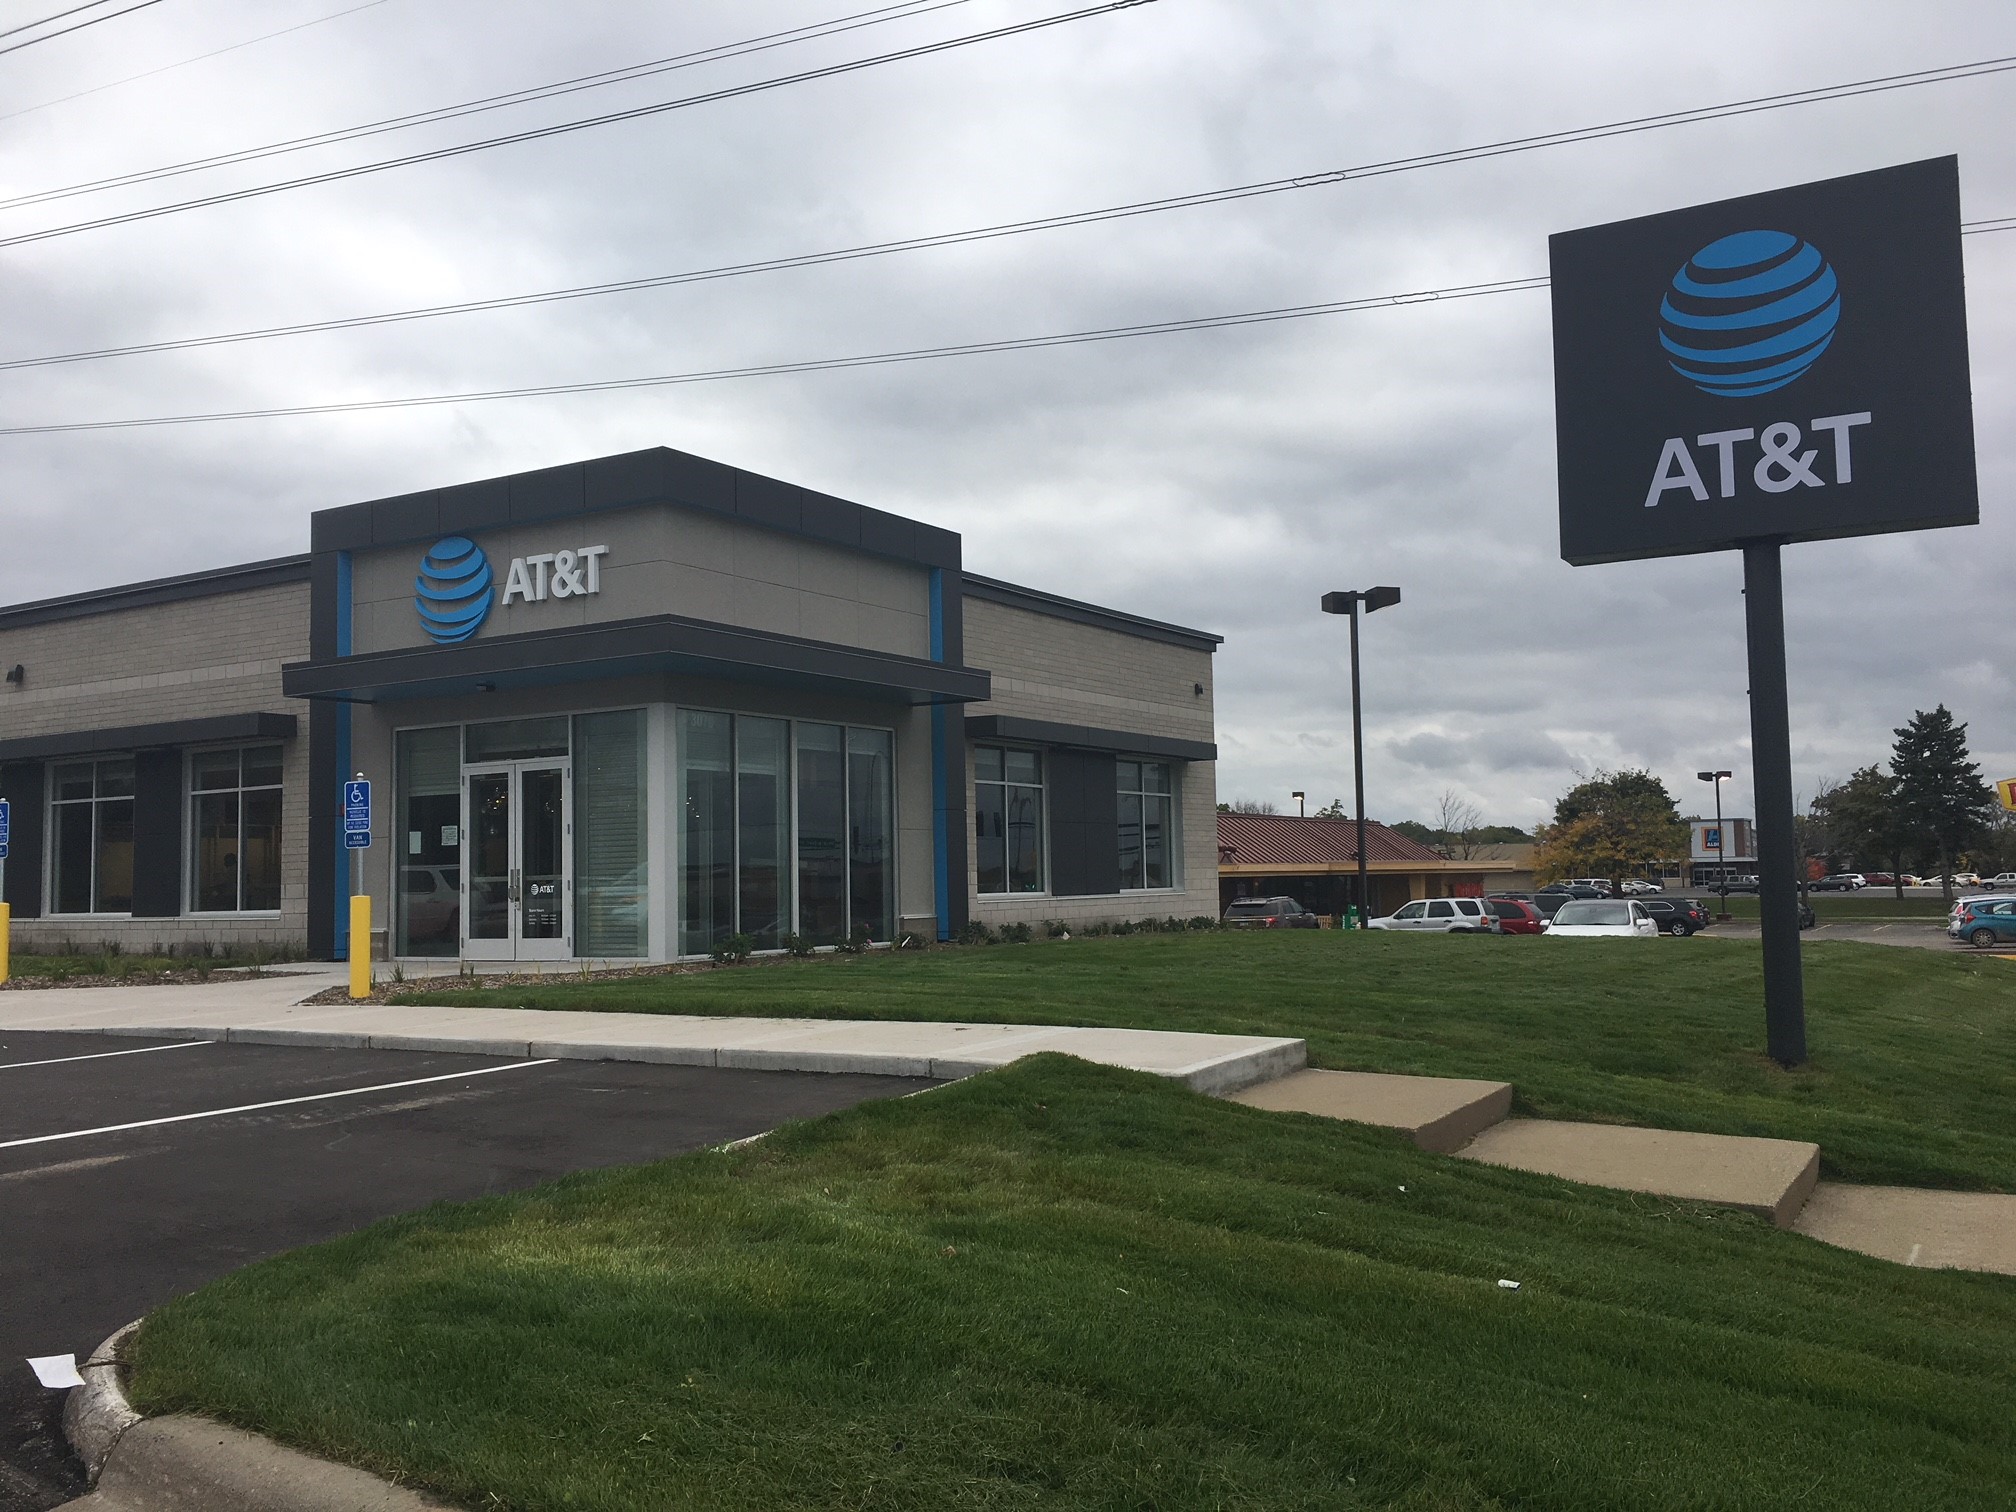 AT&T Store | 3070 White Bear Ave N, Maplewood, MN, 55109 | +1 (651) 777-0486